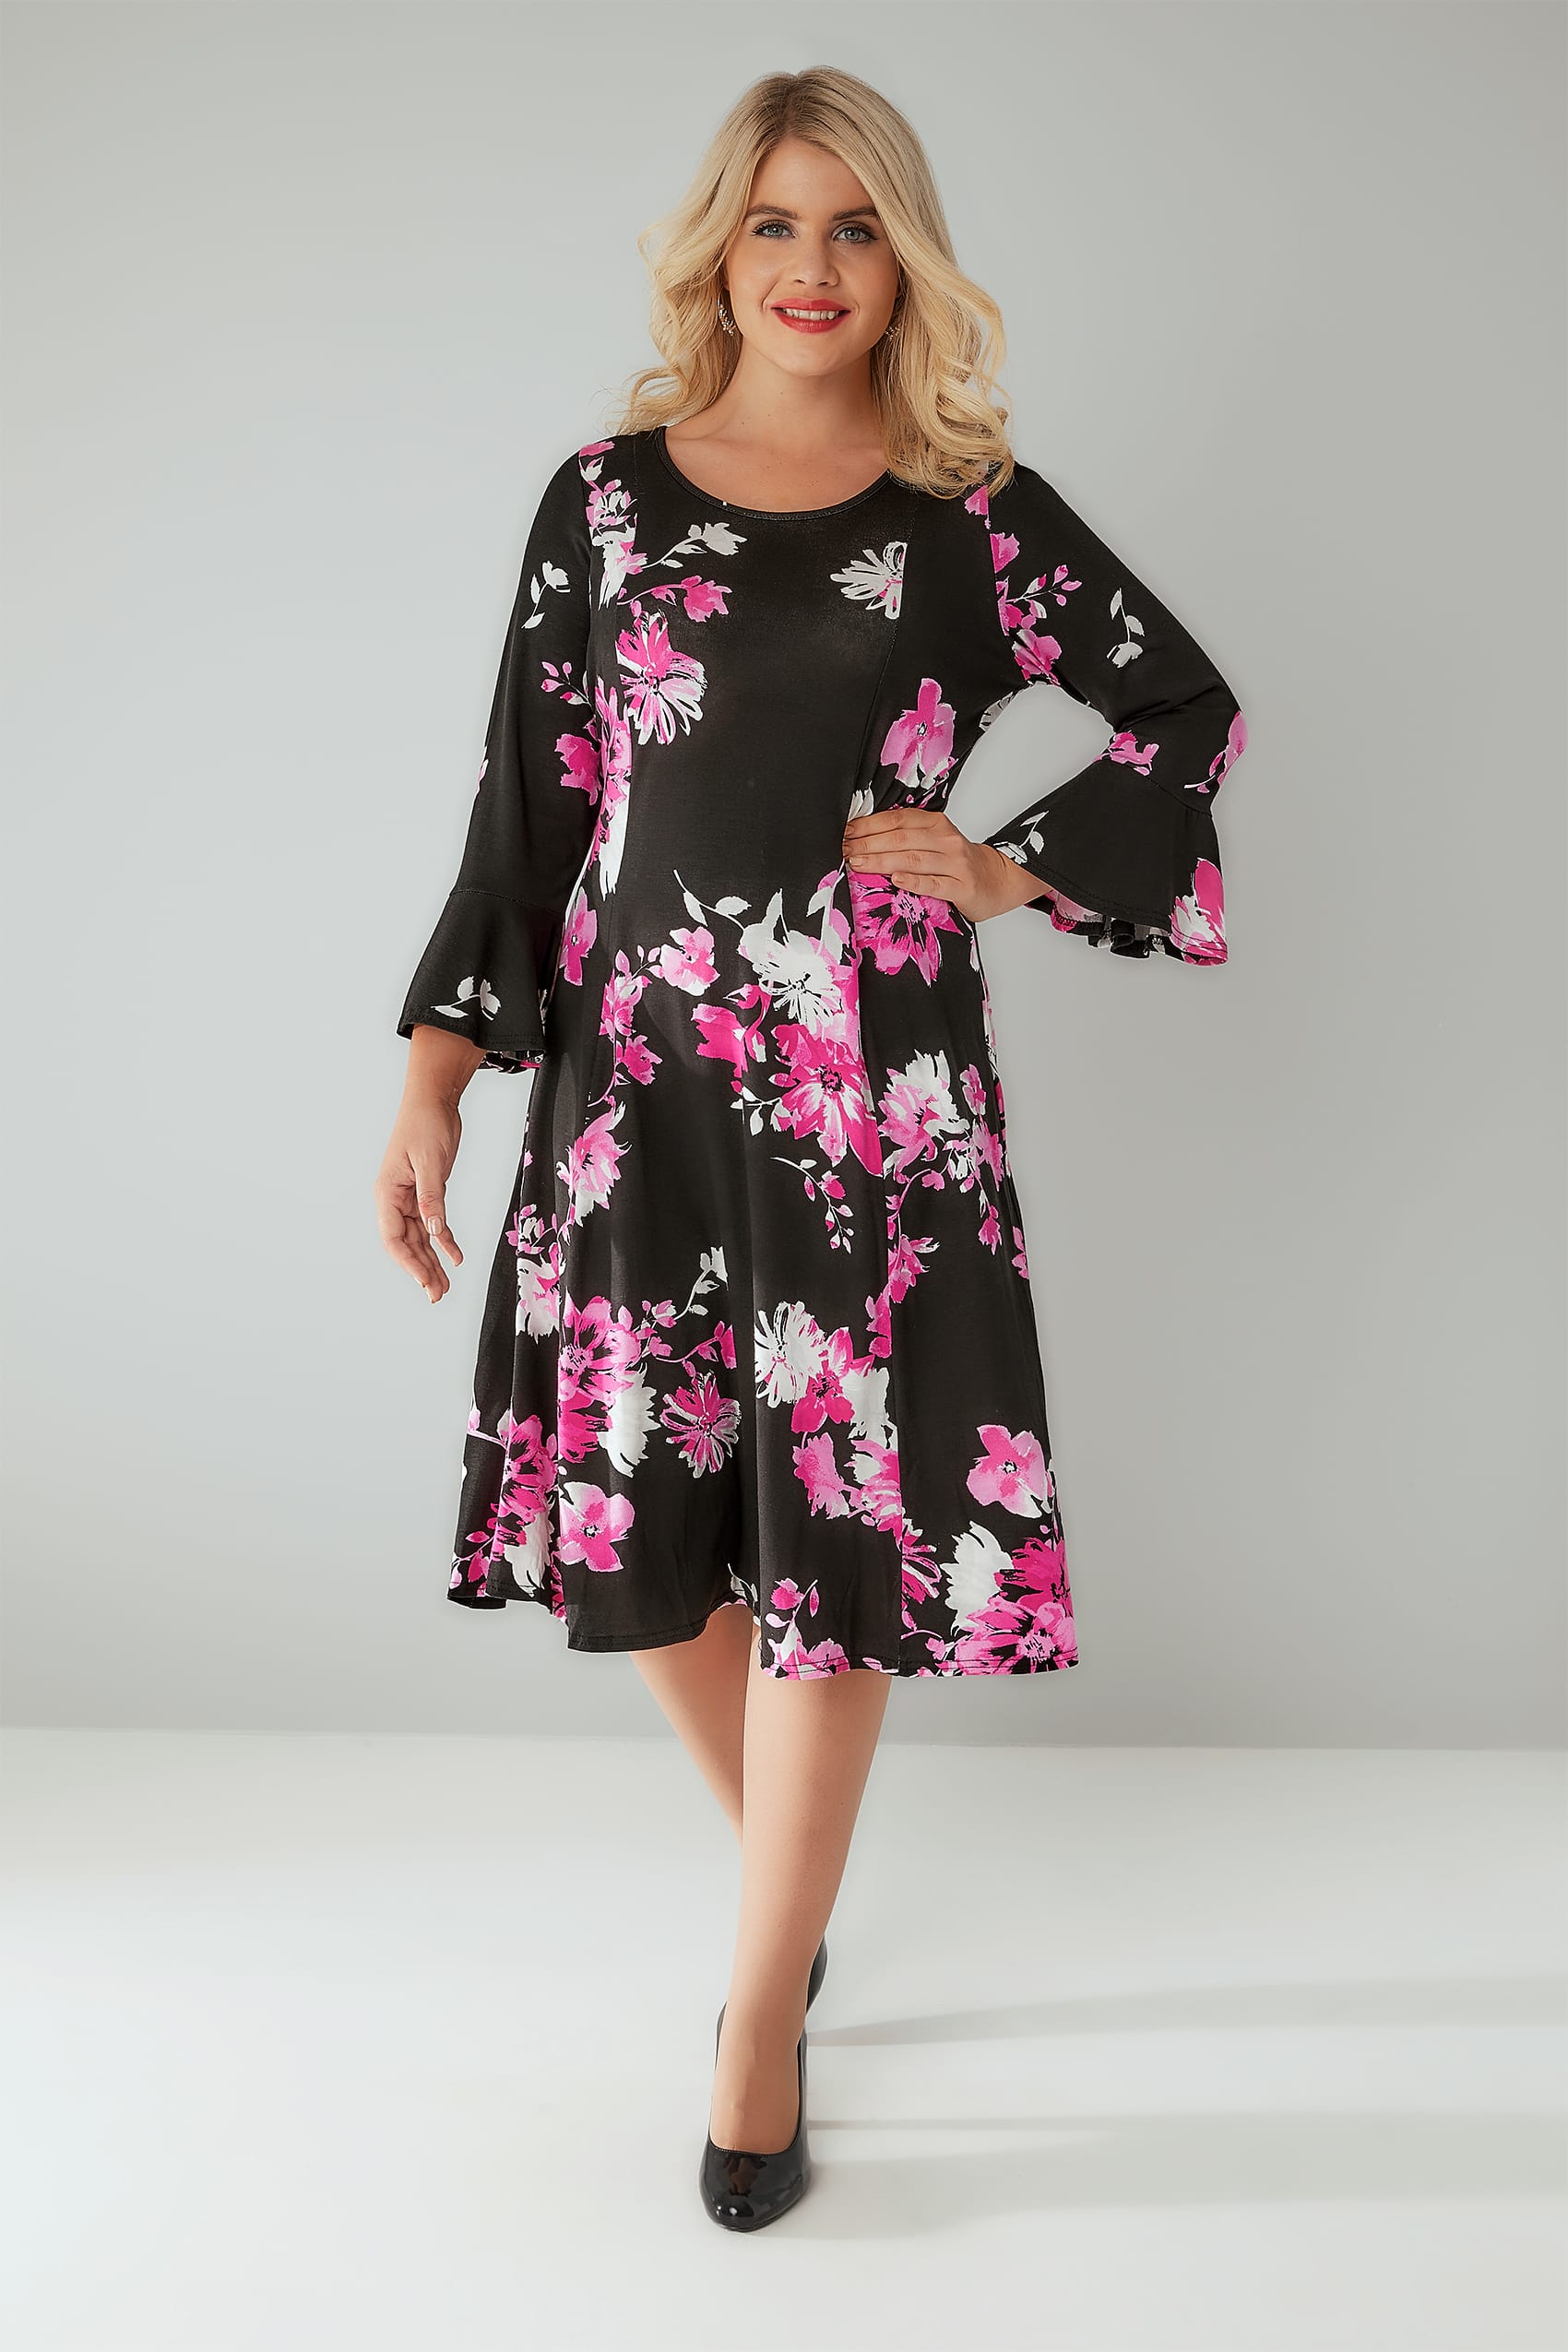 Black & Pink Floral Print Fit & Flare Jersey Dress With Flute Sleeves ...